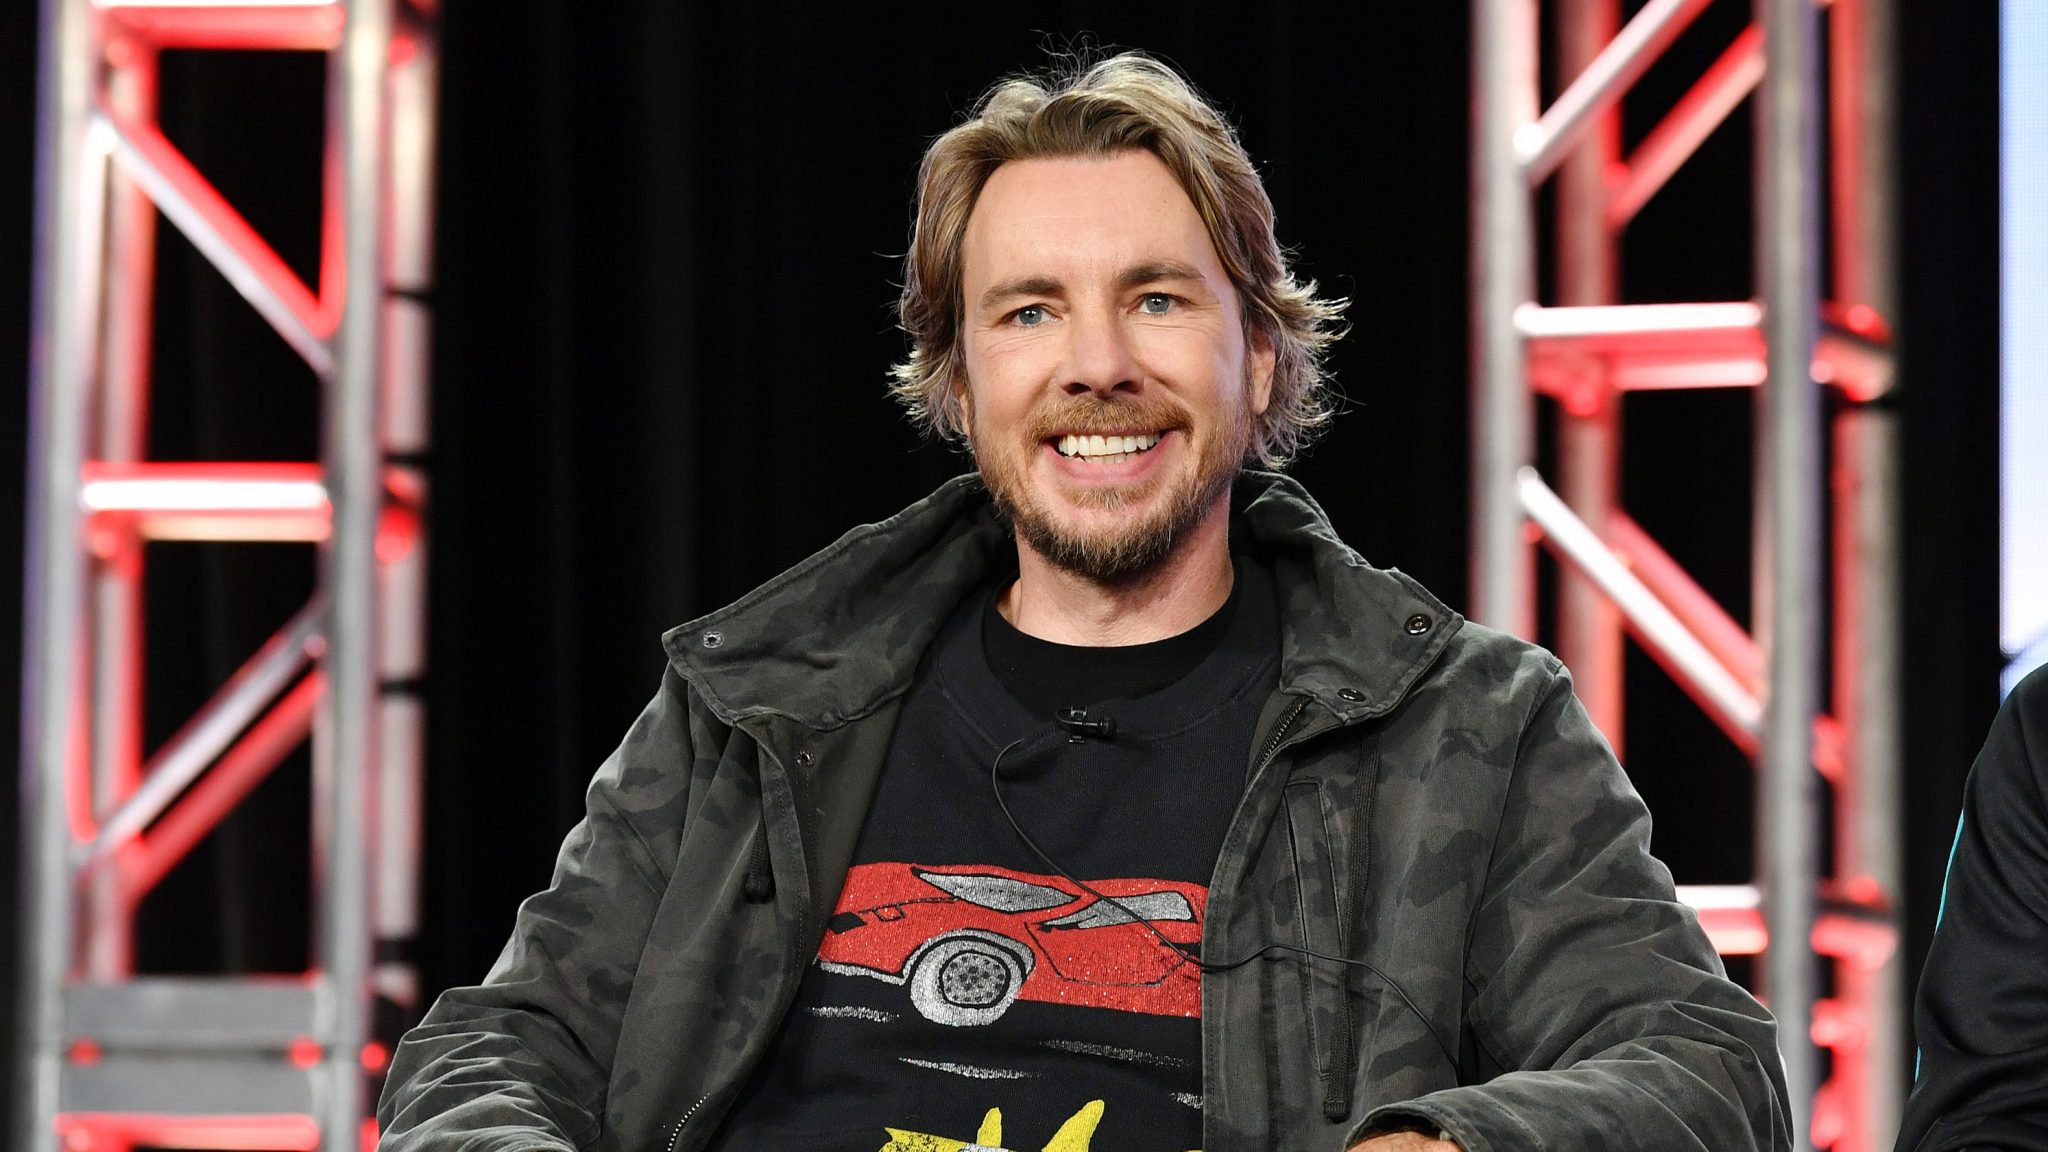 ‘It was a bummer’: Dax Shepard needs surgery after breaking multiple bones in motorcycle accident